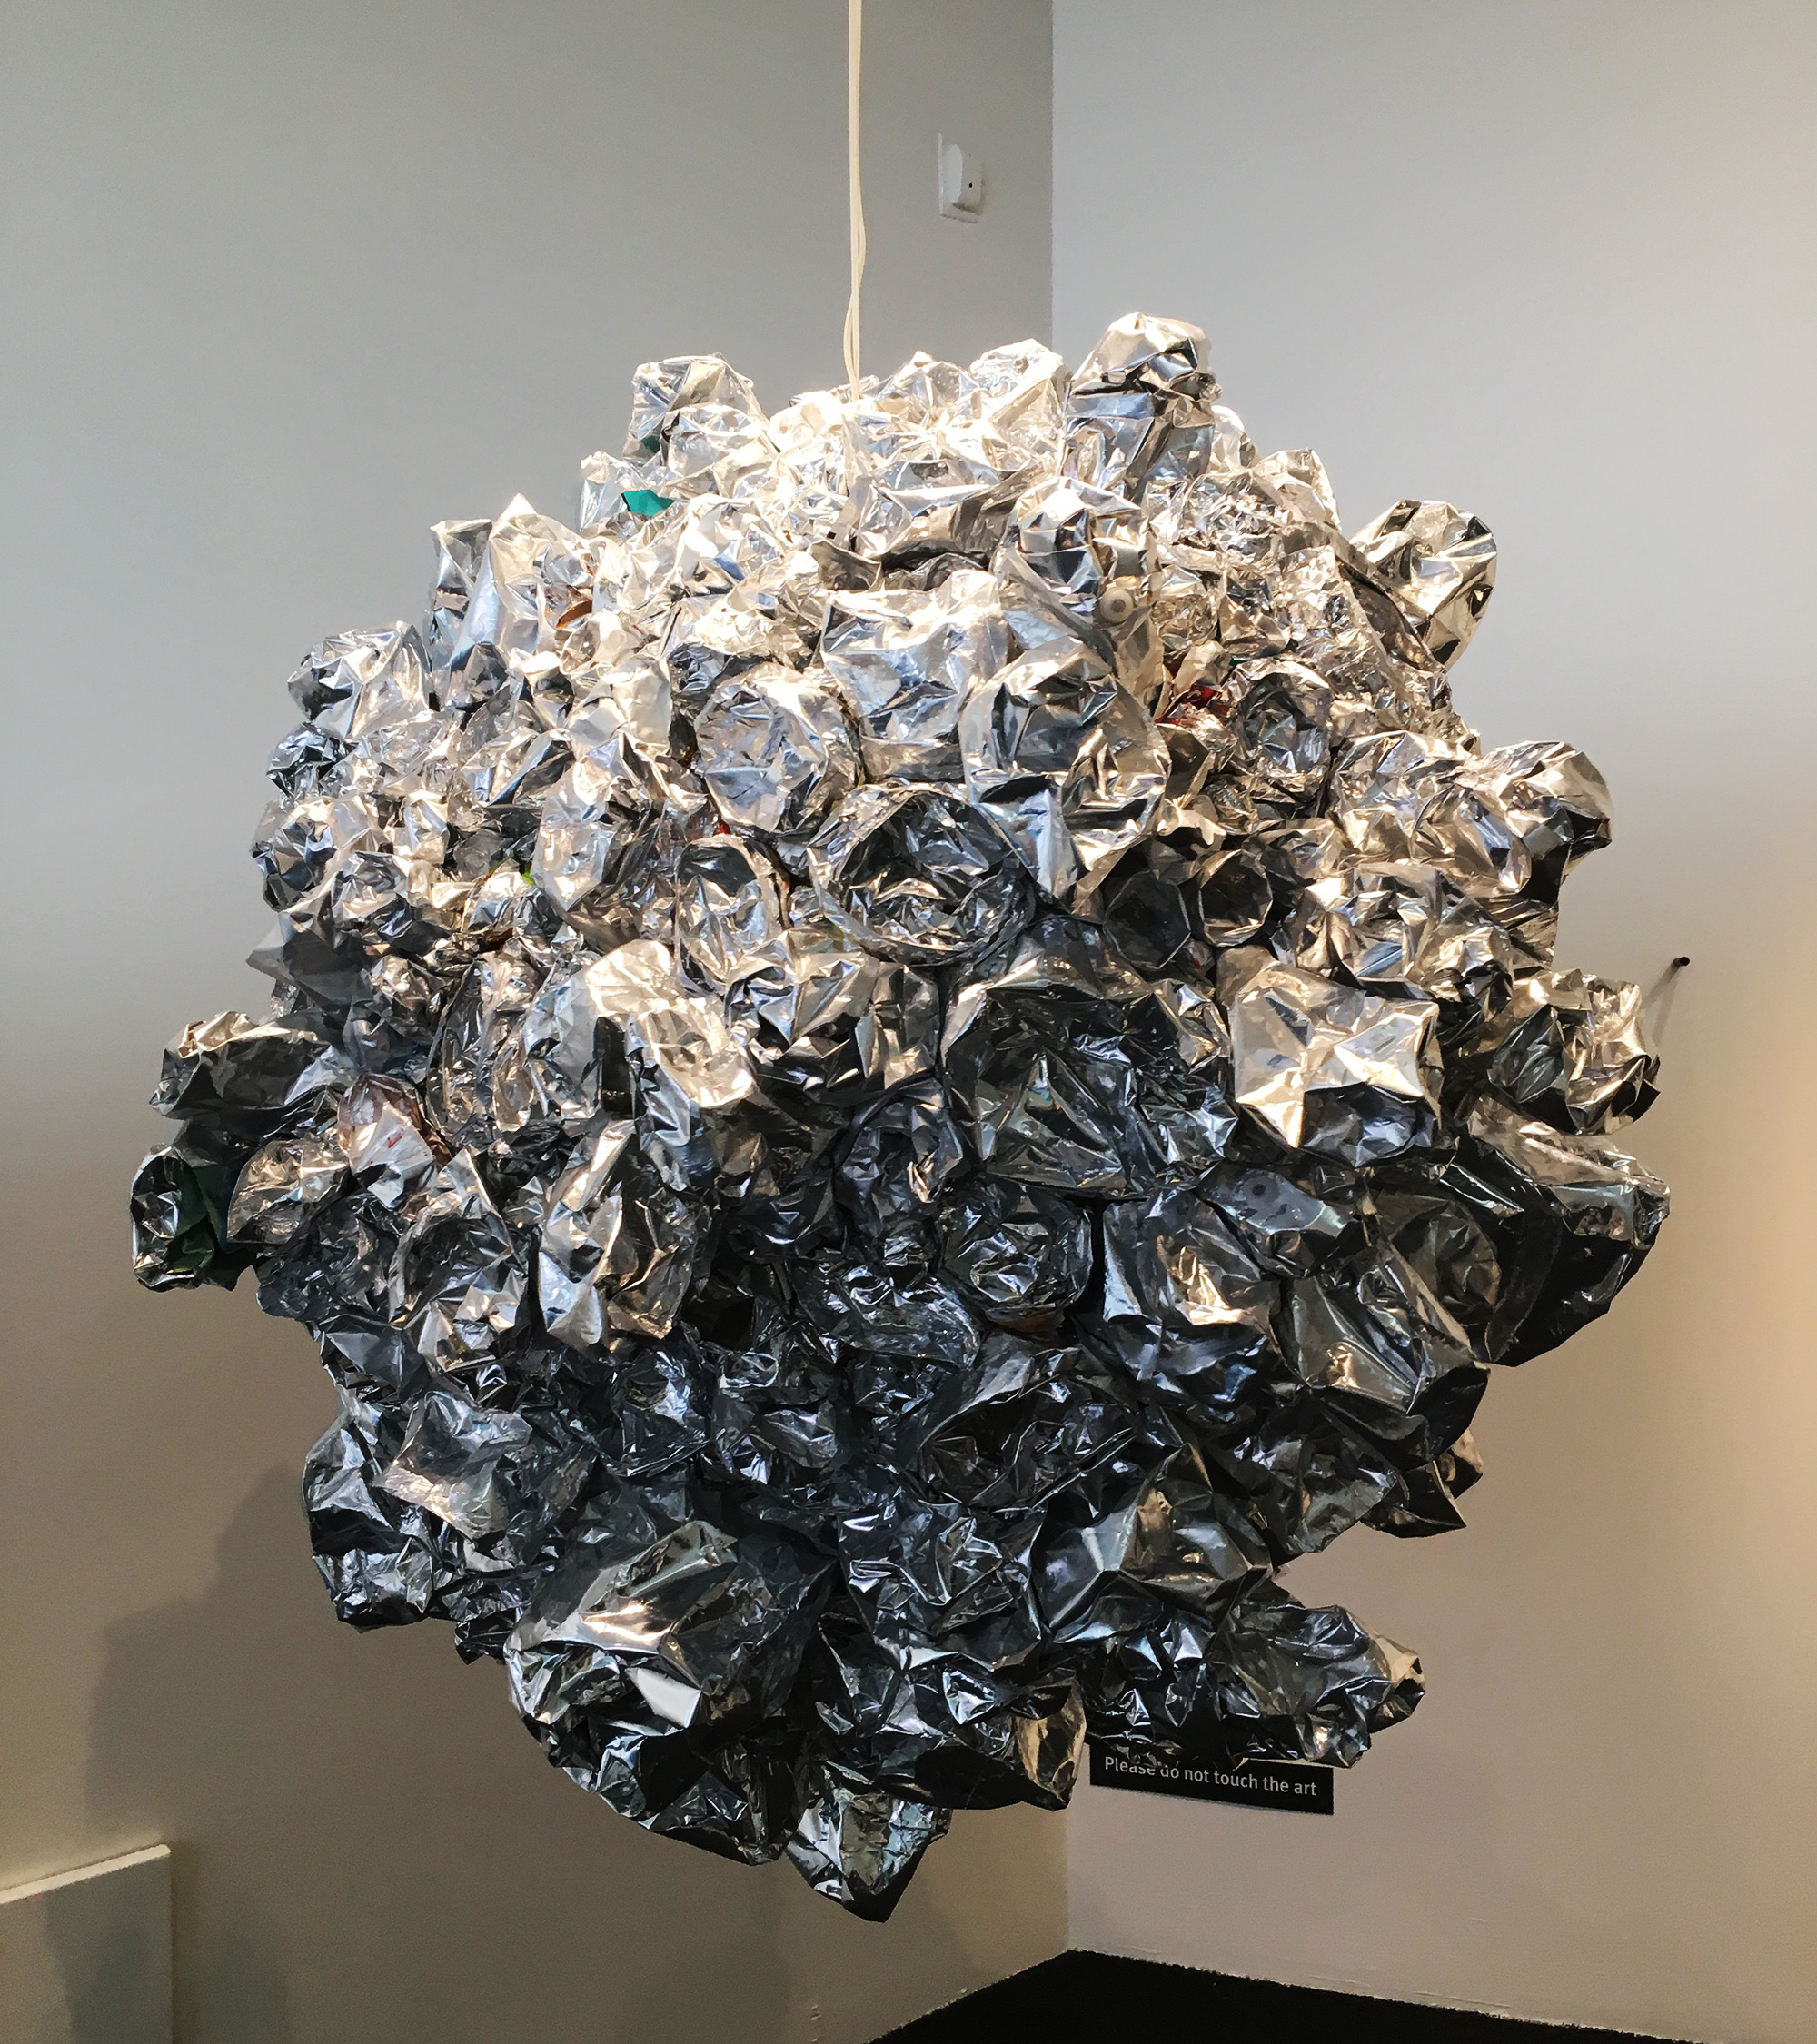 Disco ball of recycled snack bags